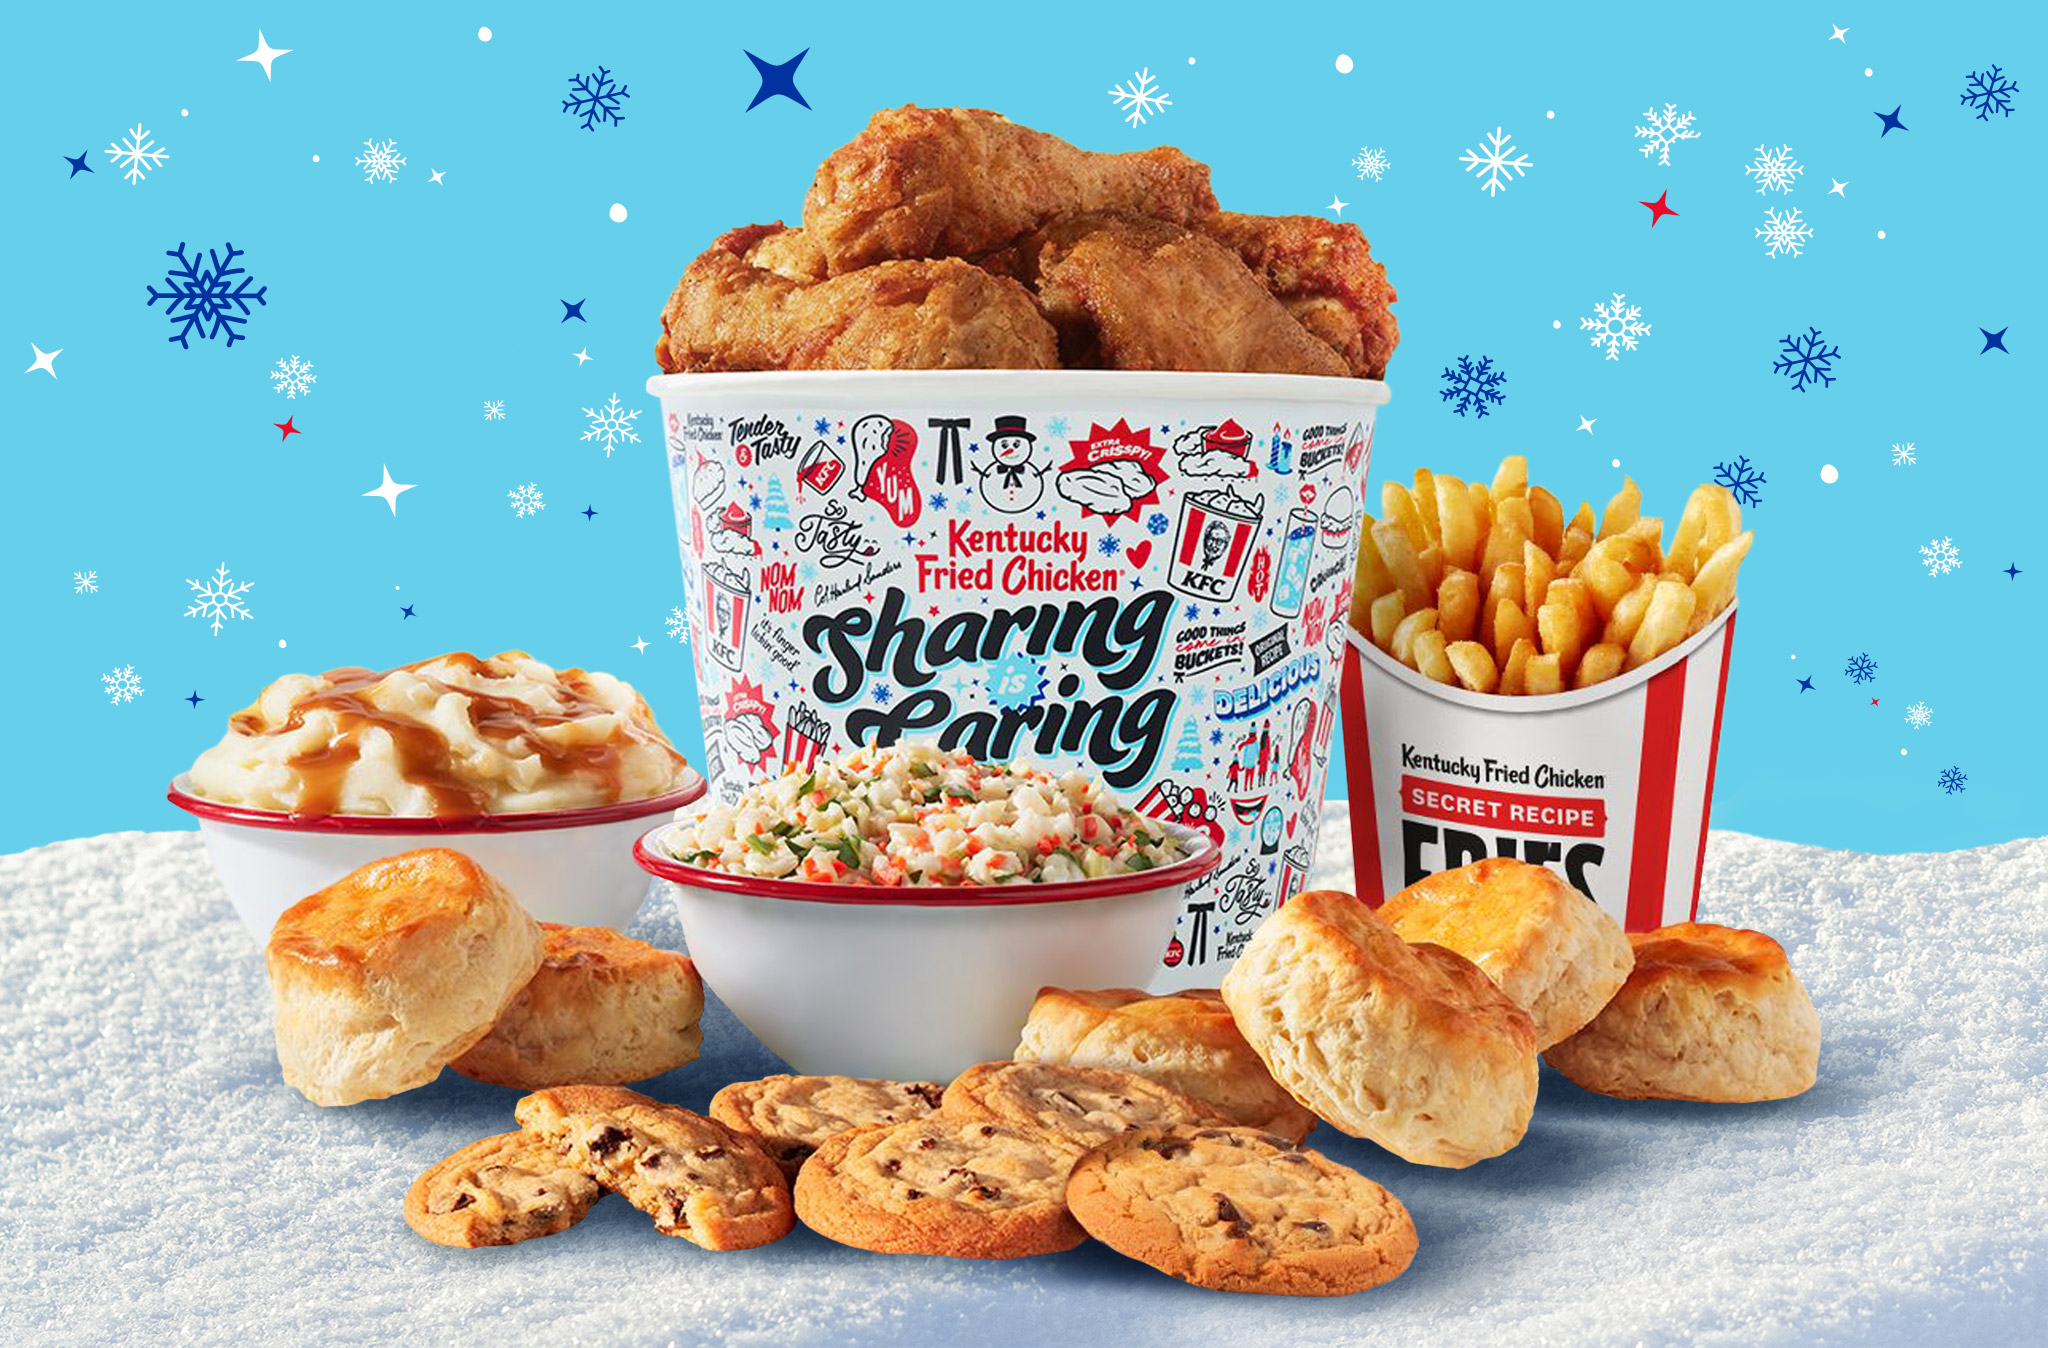 KFC Sharing is Caring Holiday Bucket. Packaging Design. Creative & Art Direction, Illustration by Allan Chan Creative.